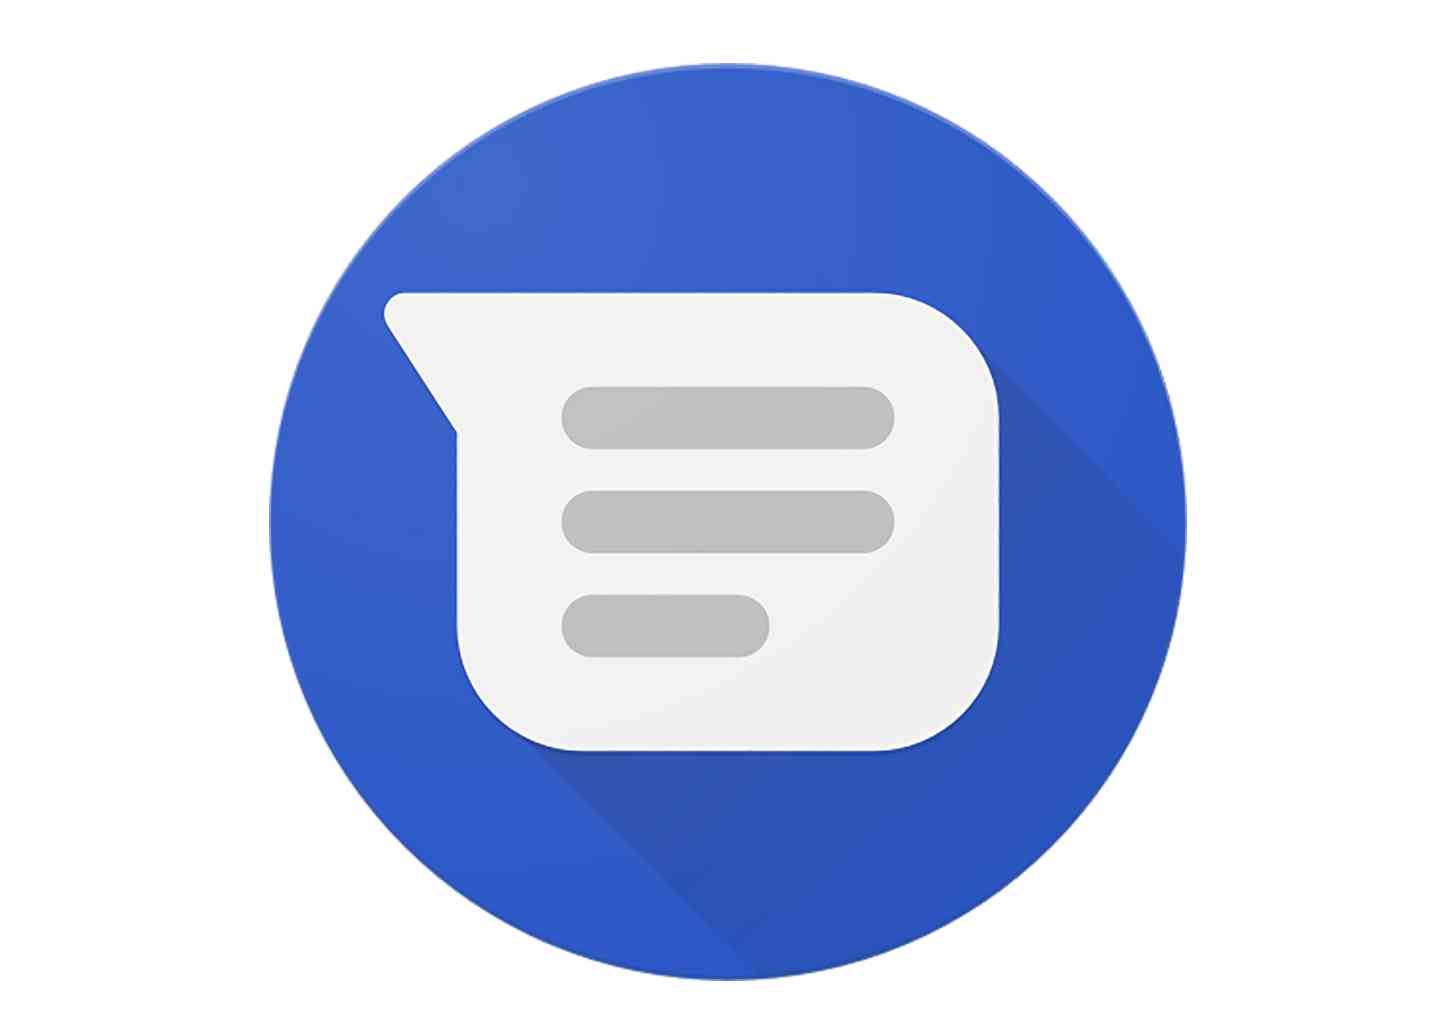 Android Messages app icon